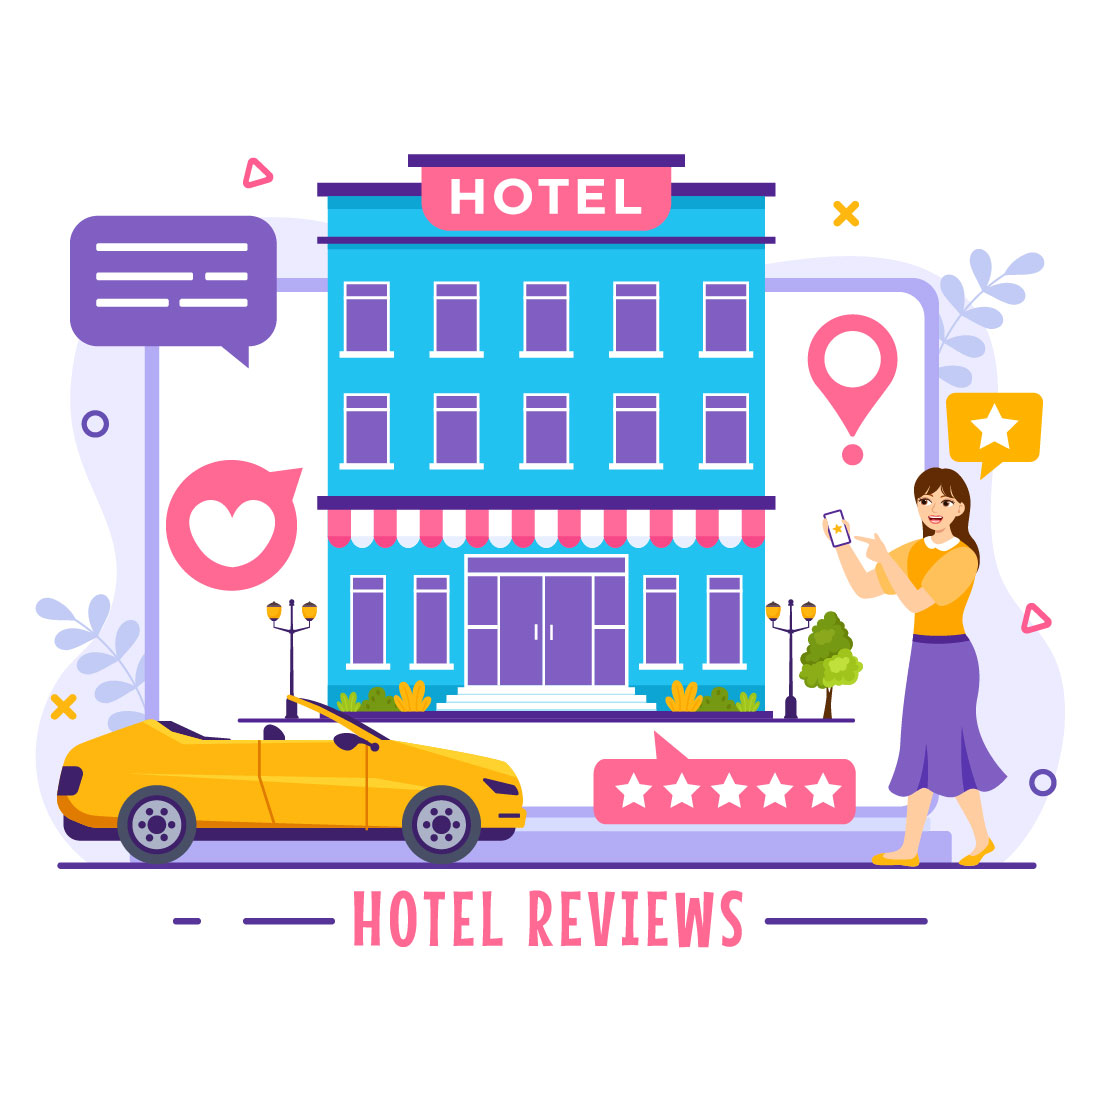 12 Hotel Reviews Illustration preview image.